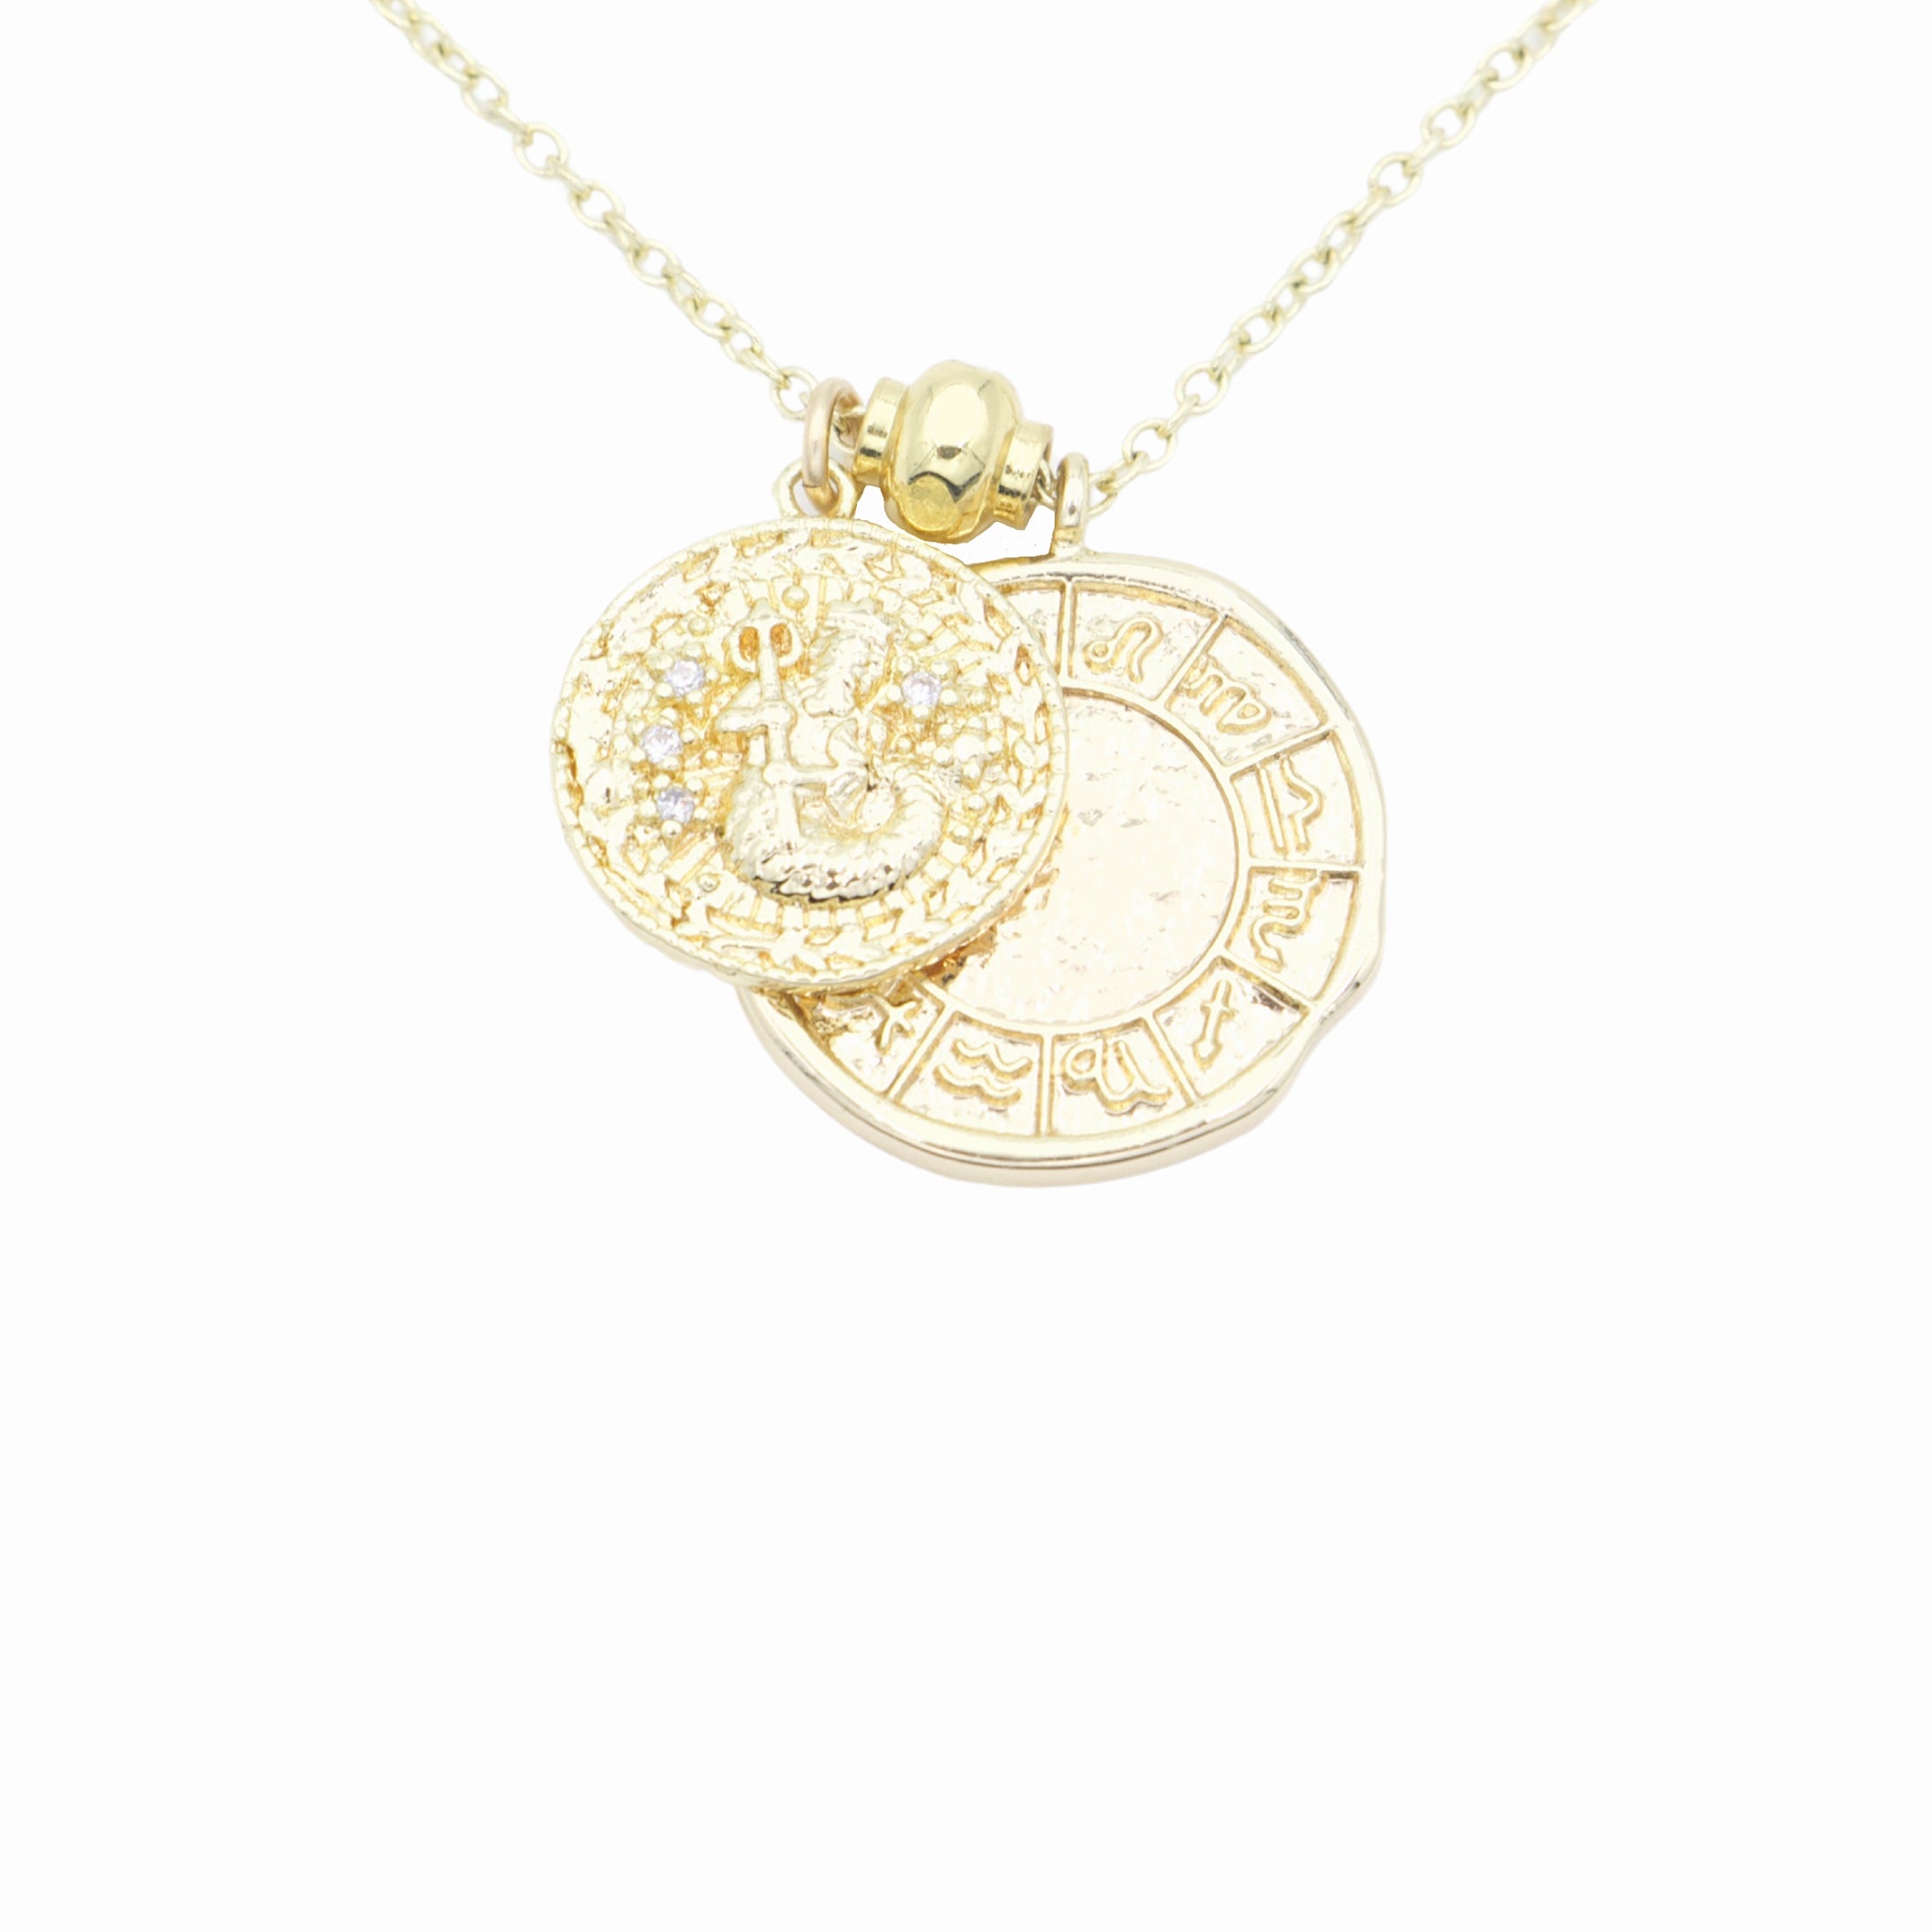 AW Boutique's dual zodiac coin necklace featuring a dainty necklace chain, zodiac rustic coin charm, and your chosen star sign coin charm. Charms separated by a gold bead. Part of the Celestial Collection. Gold filled jewellery. Option shown is Aquarius.